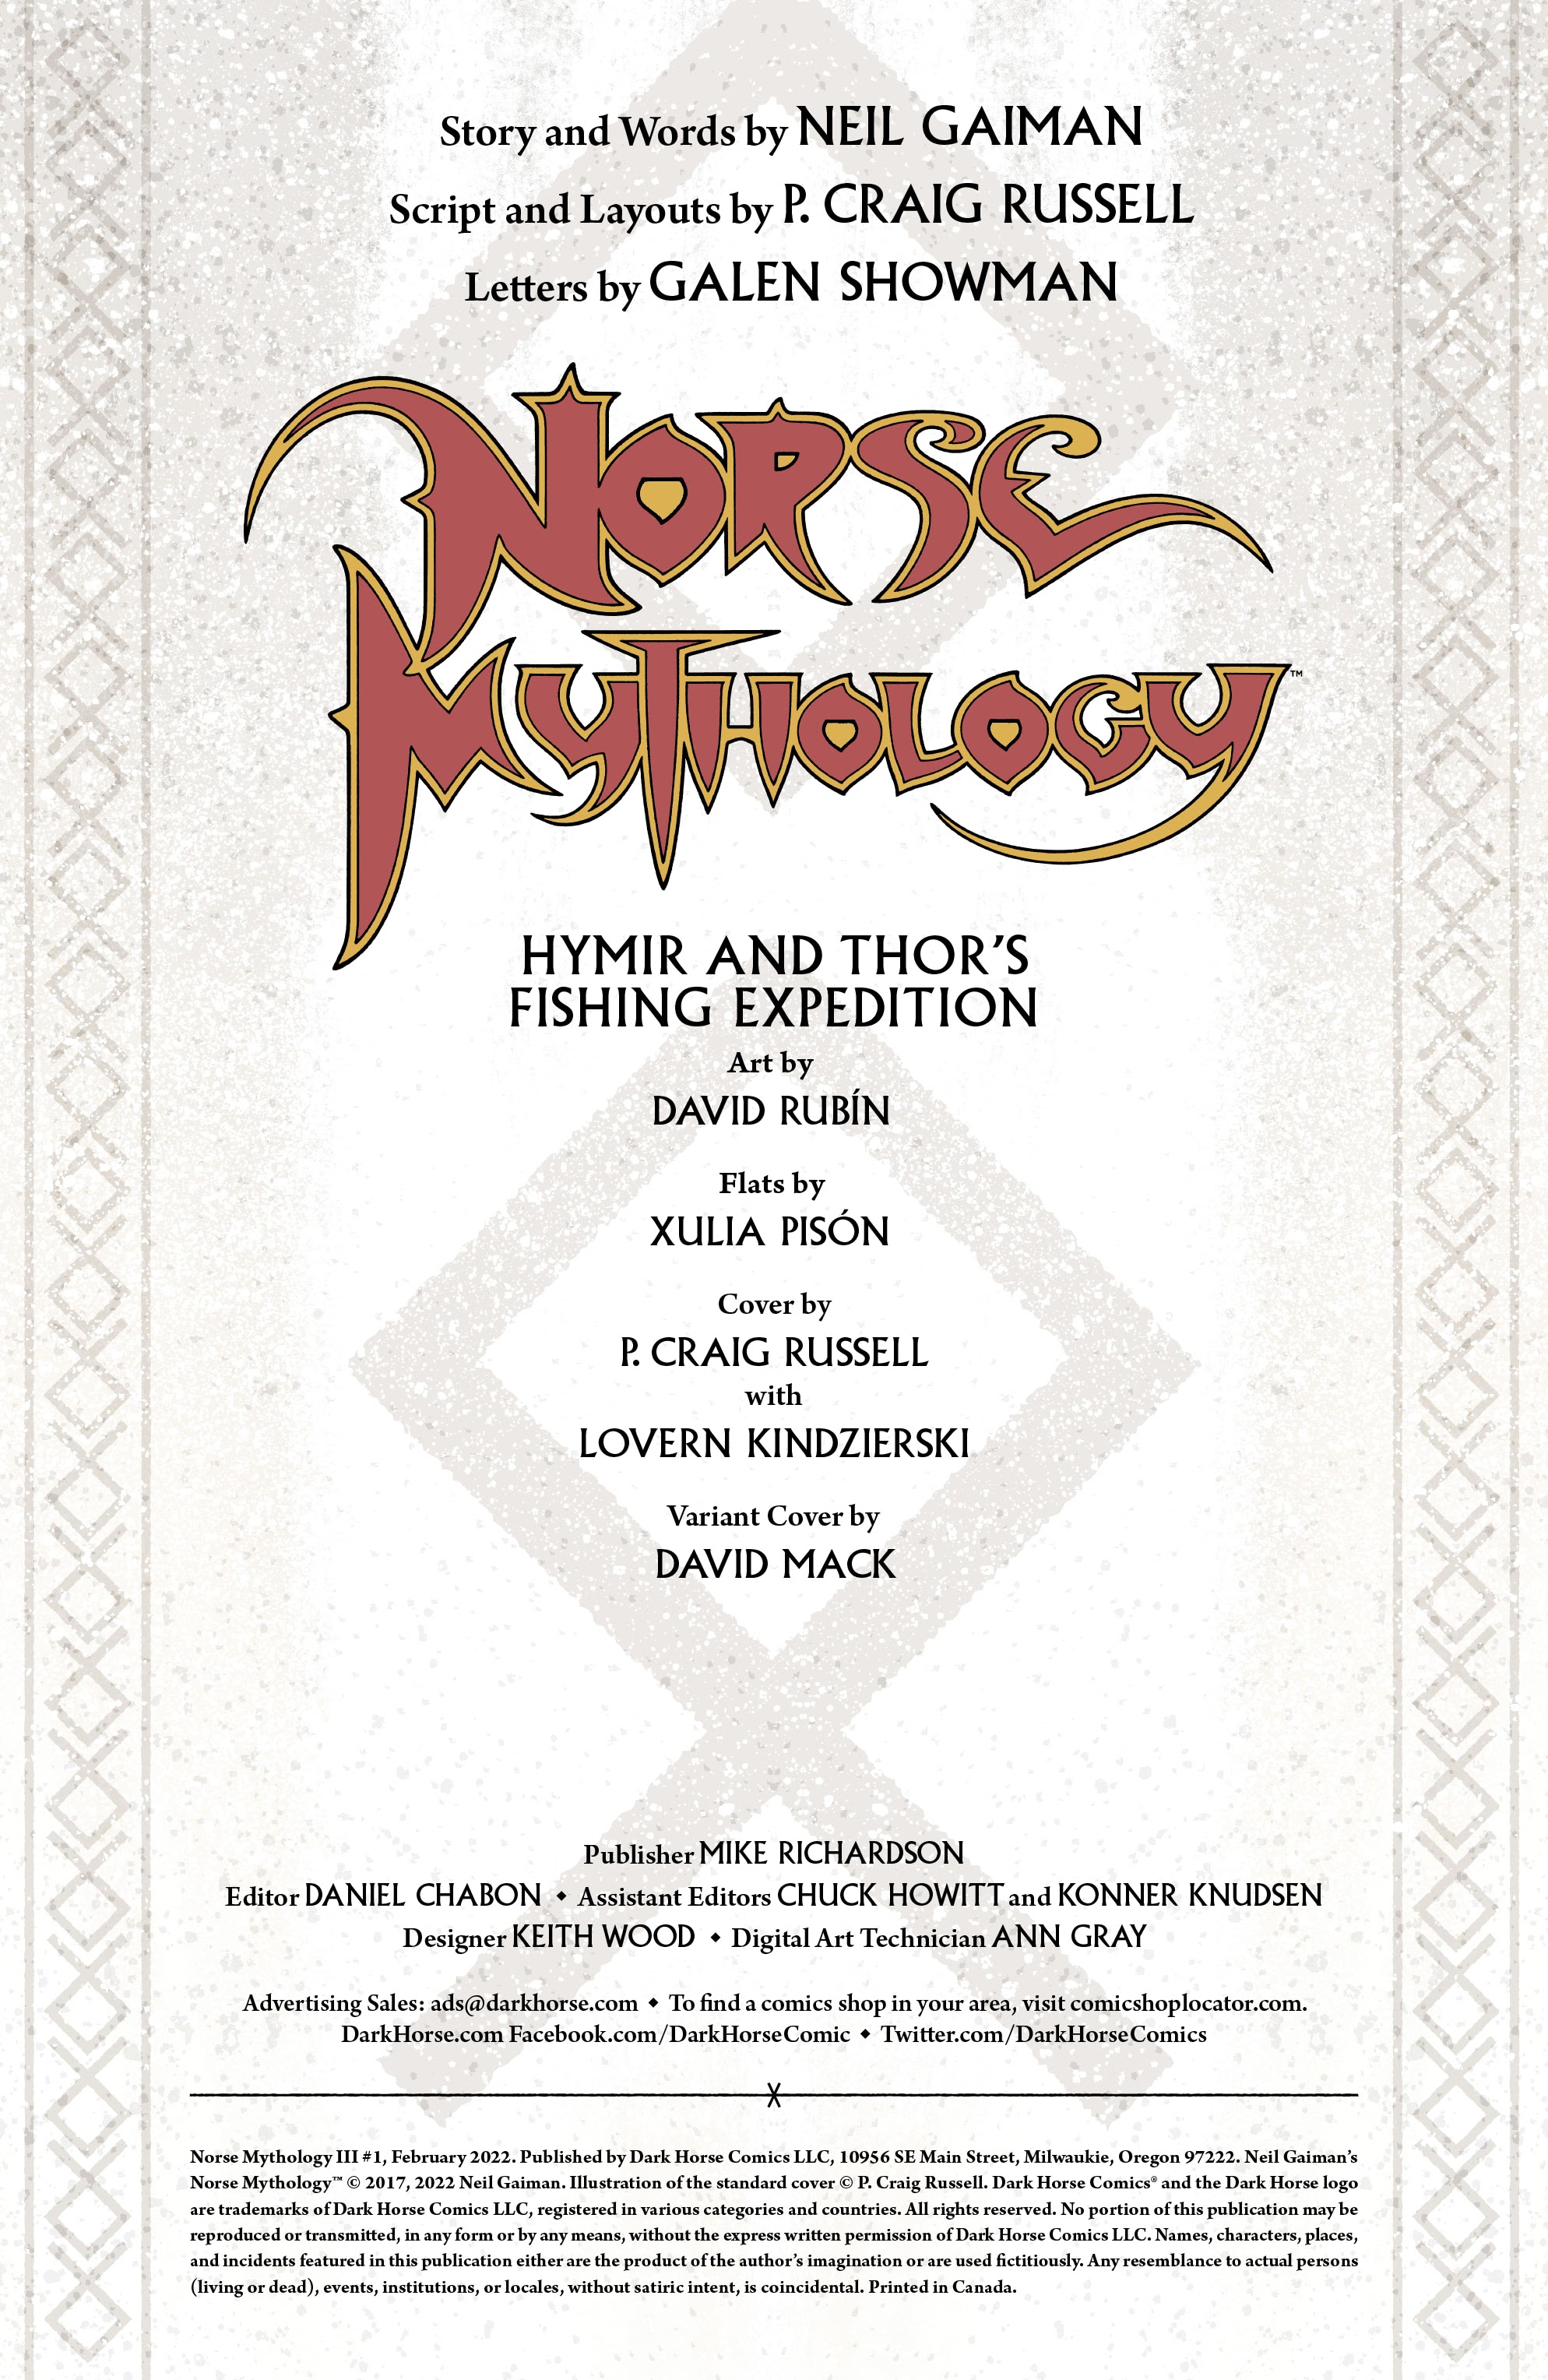 Read online Norse Mythology III comic -  Issue #1 - 2